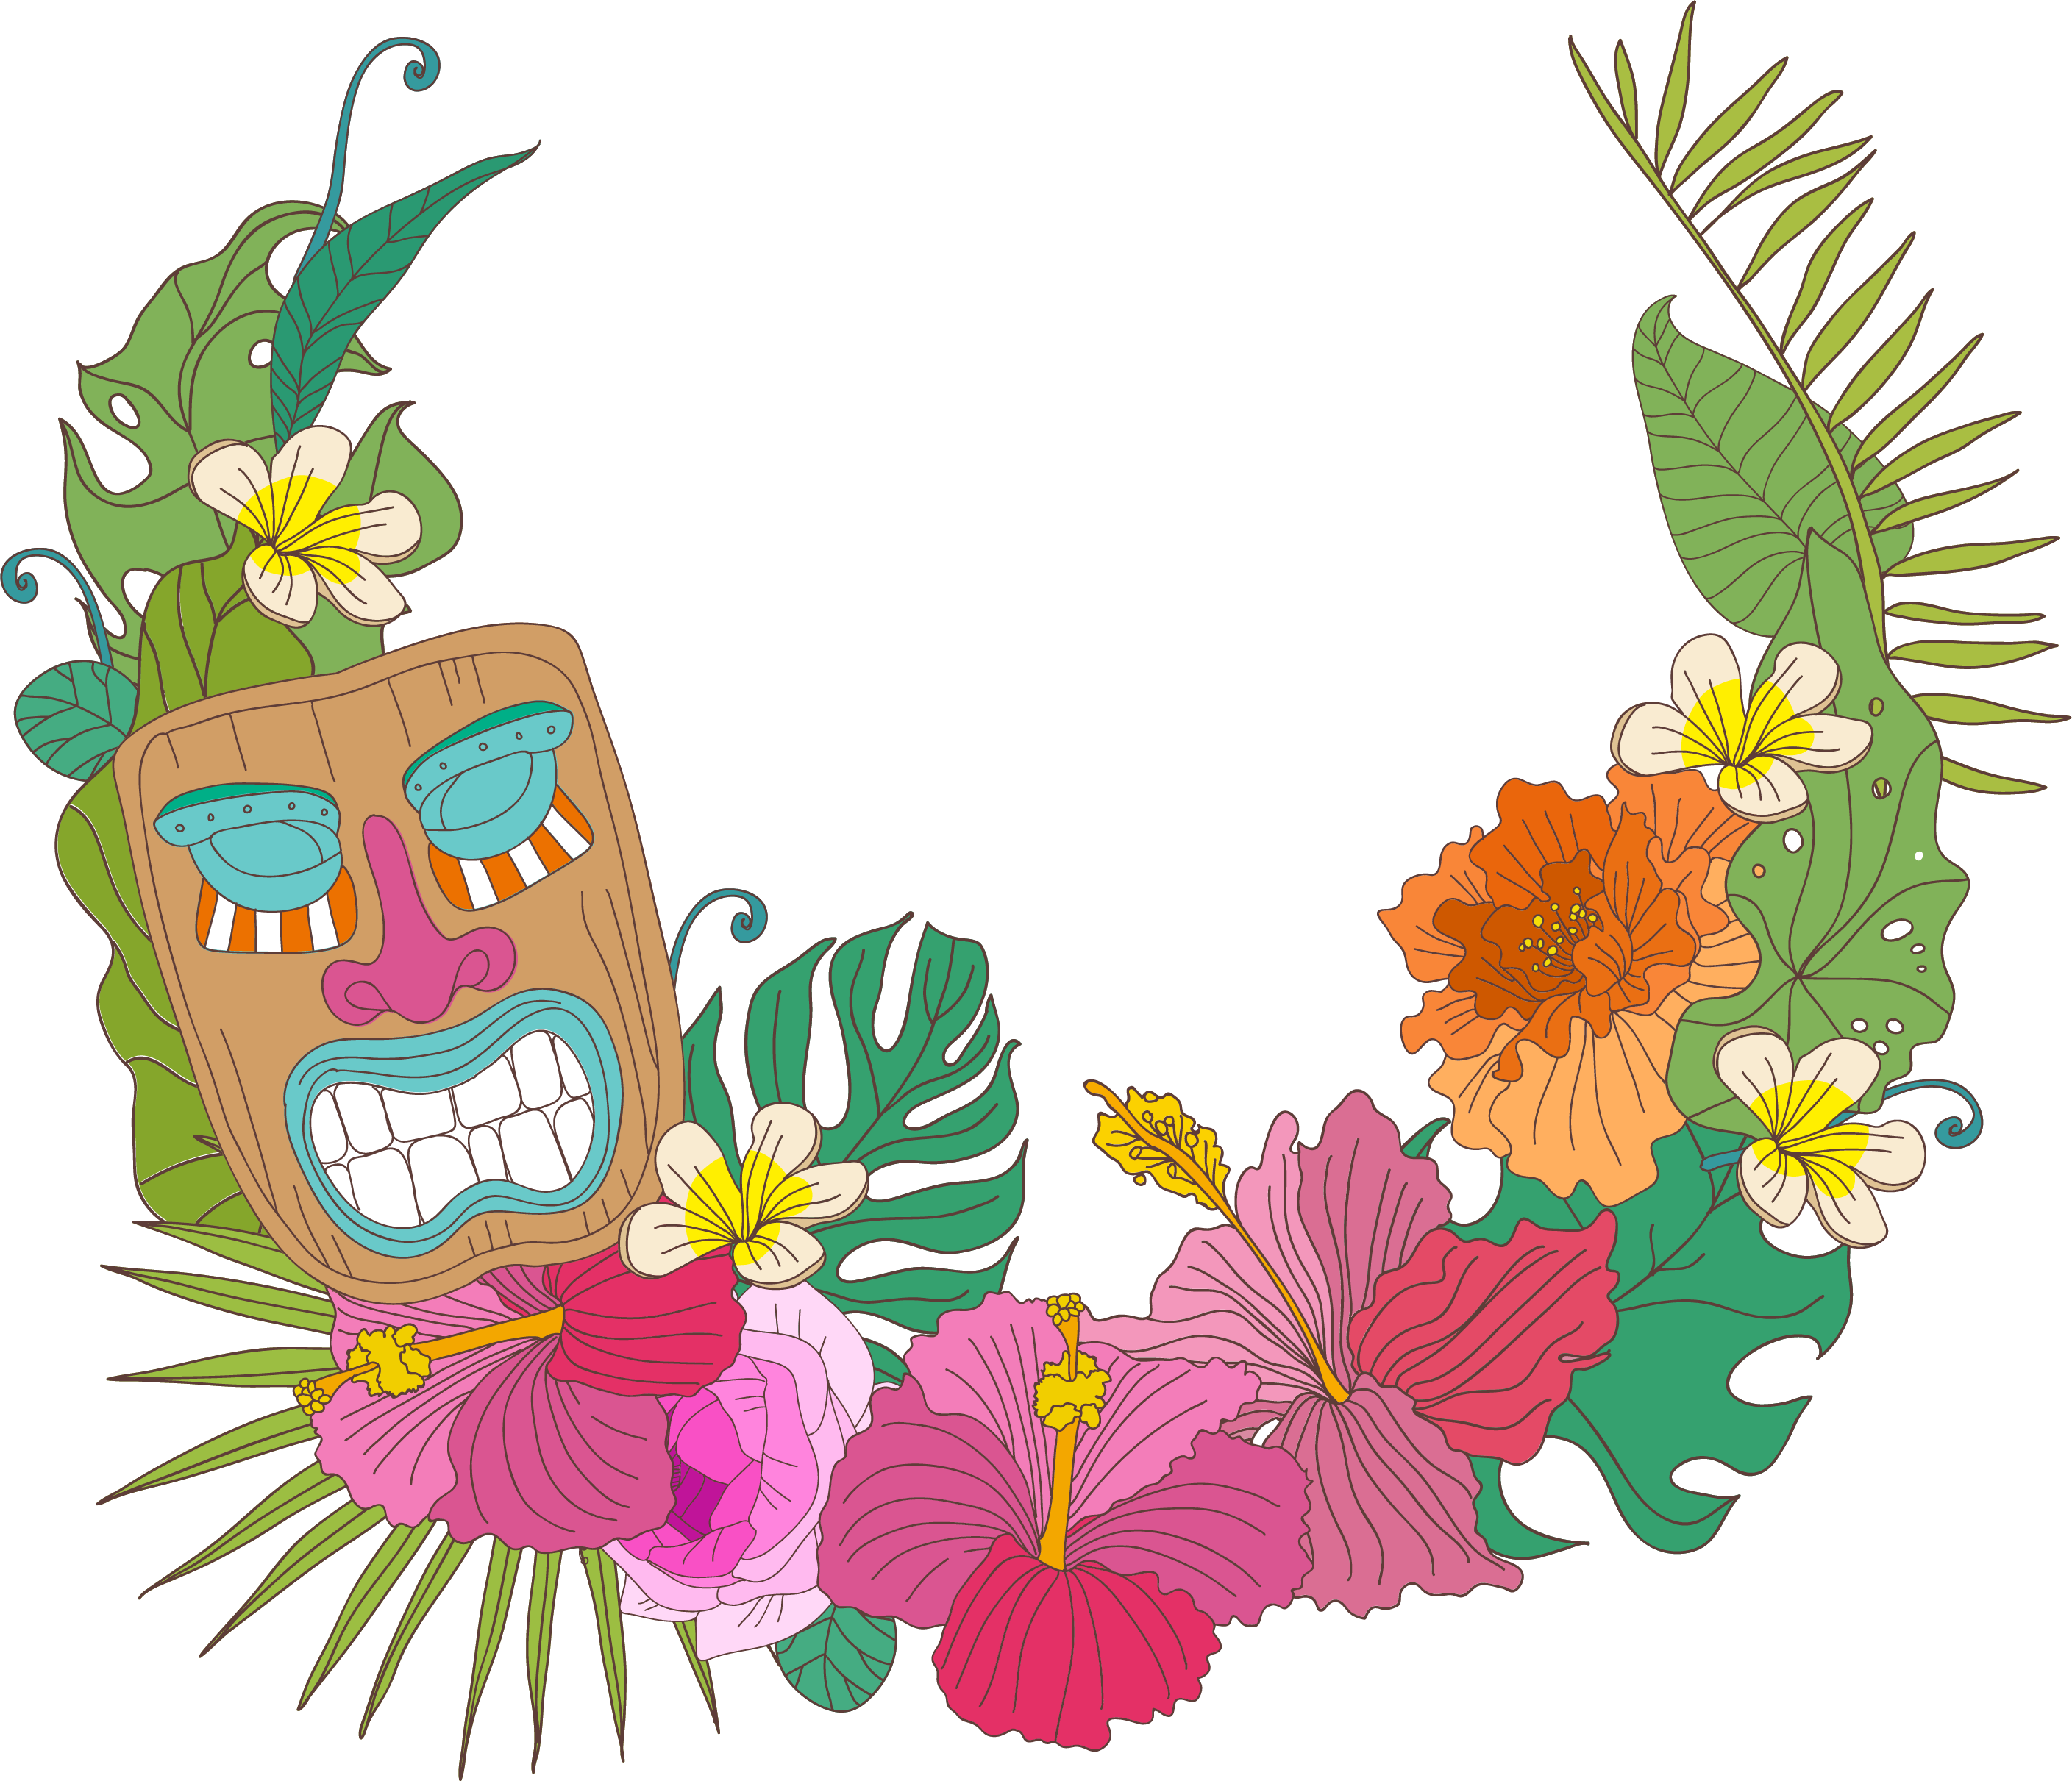 A Colorful Floral Wreath With A Mask And Flowers